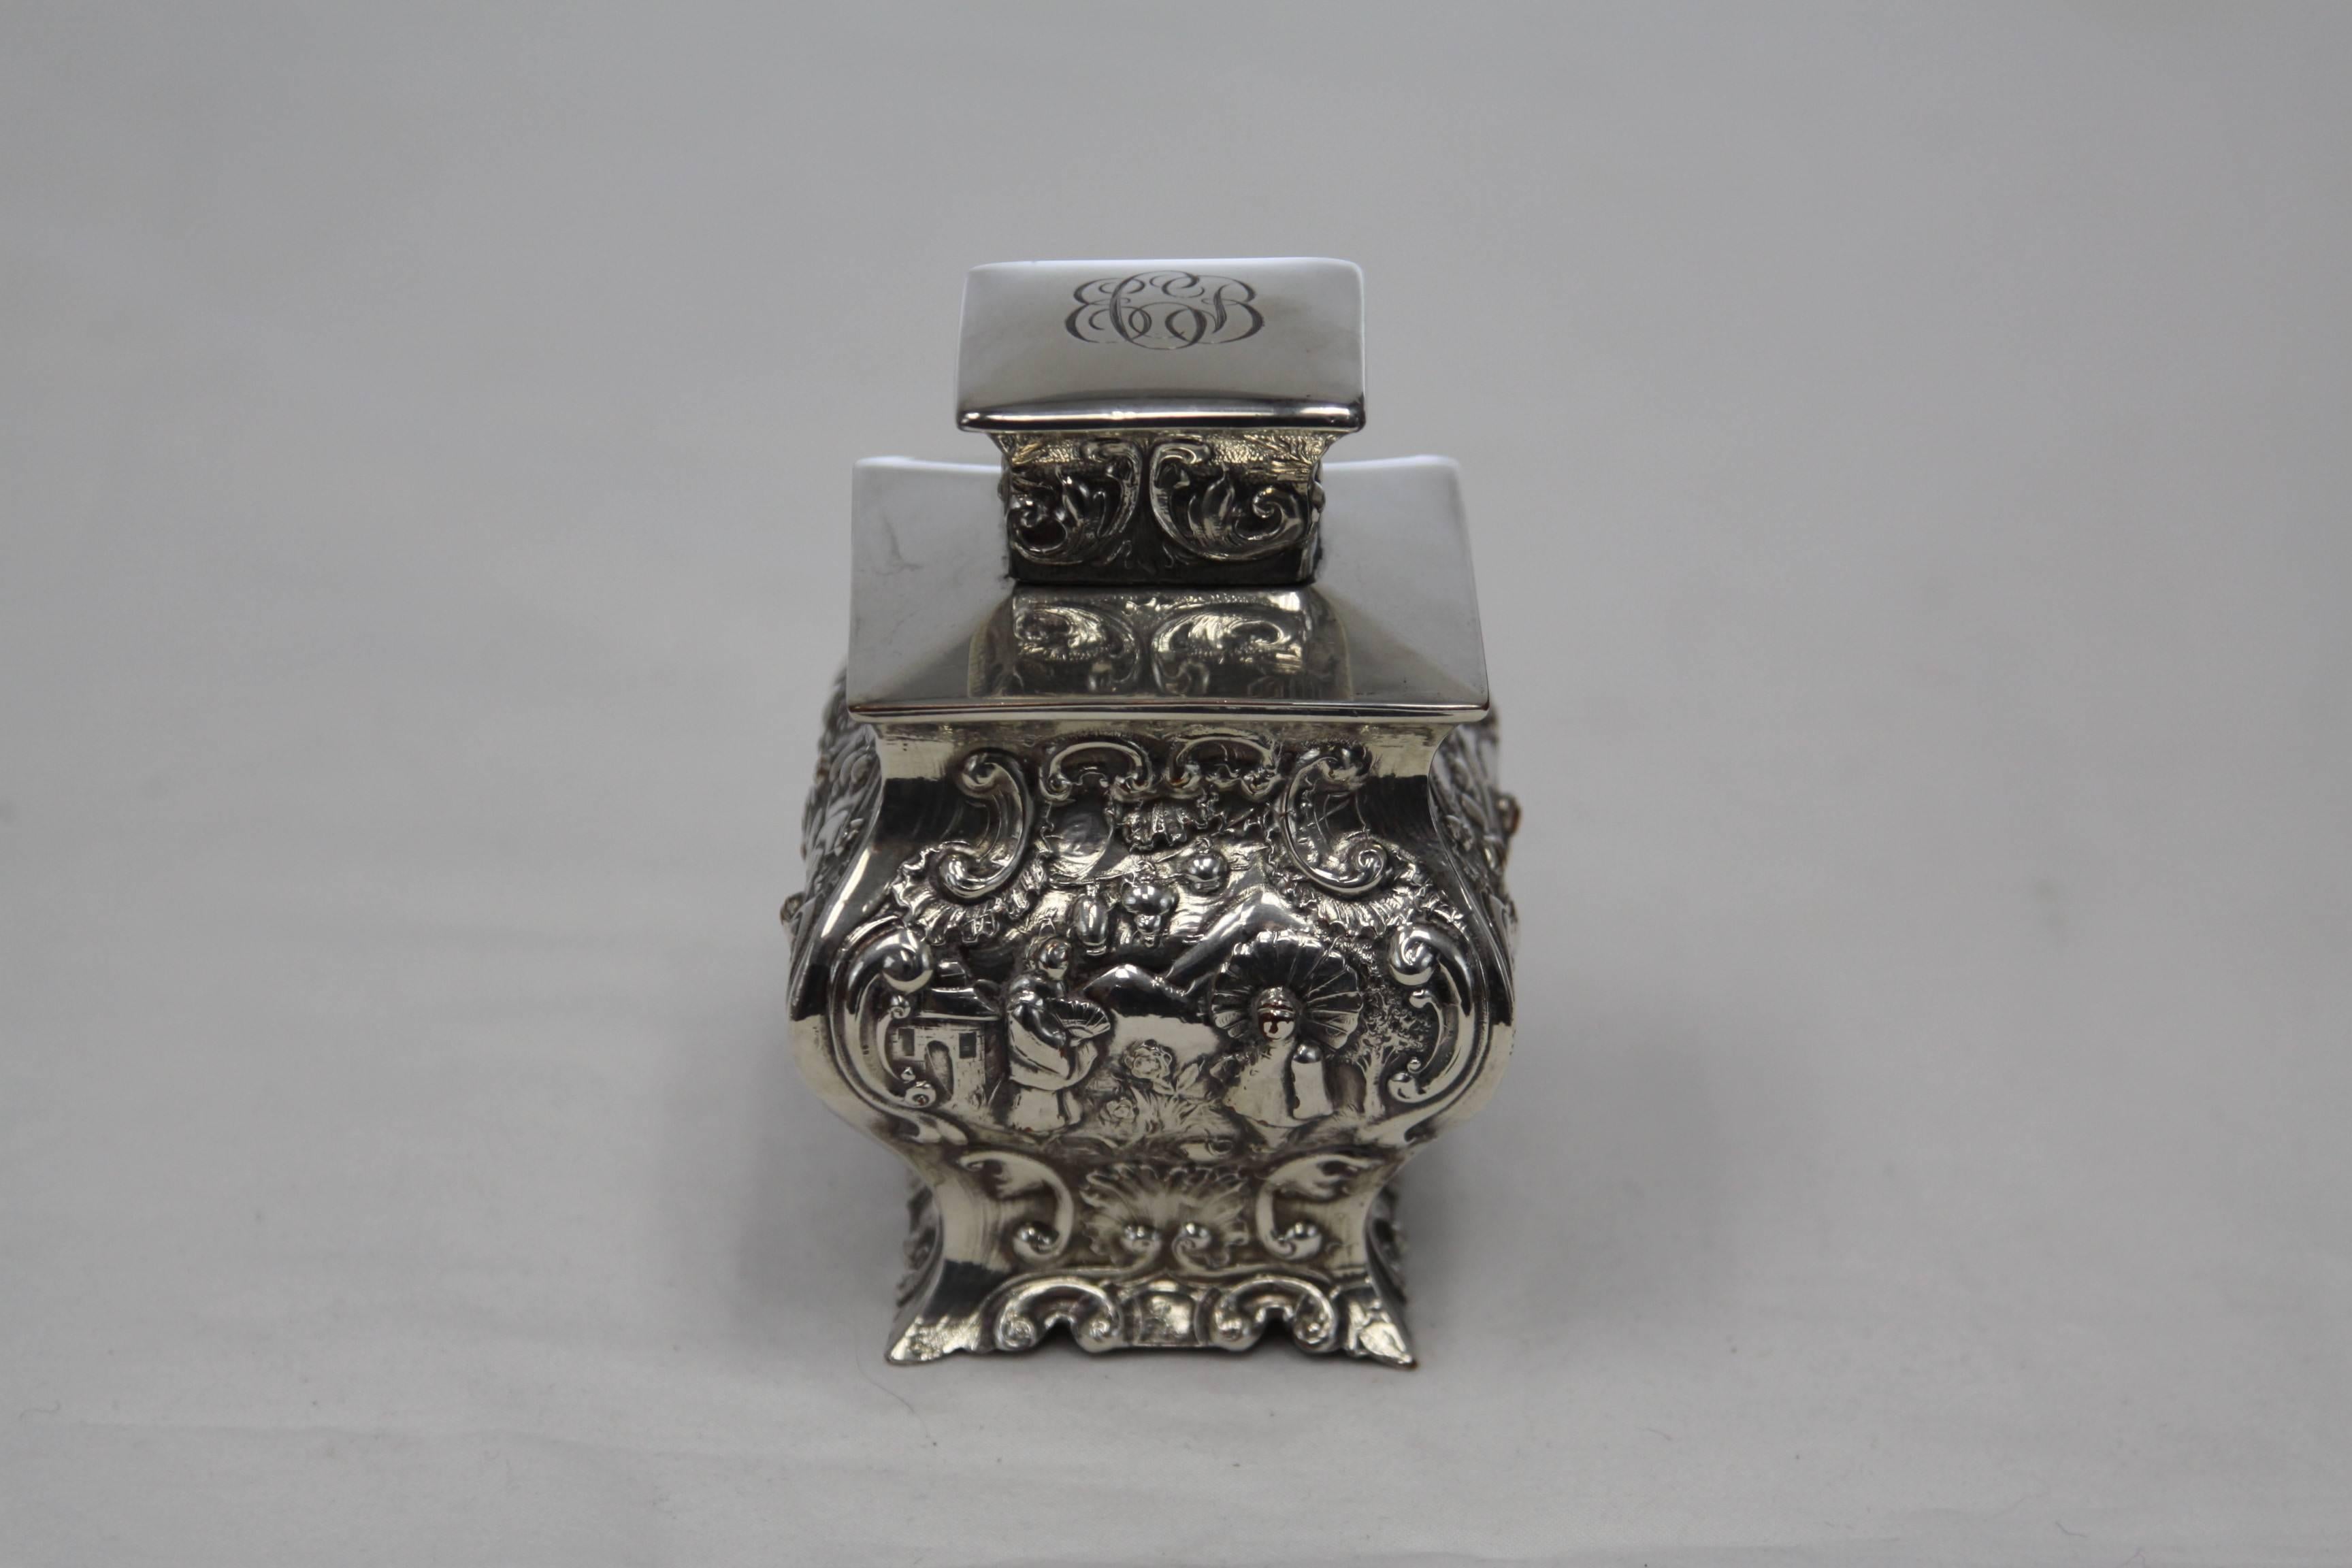 This tea caddy is heavily detailed and engraved with asian designs. It is monogrammed EBC on the top. Made from Sheffield silver on copper. Great detail in excellent vintage condition with minor signs of wear and age.